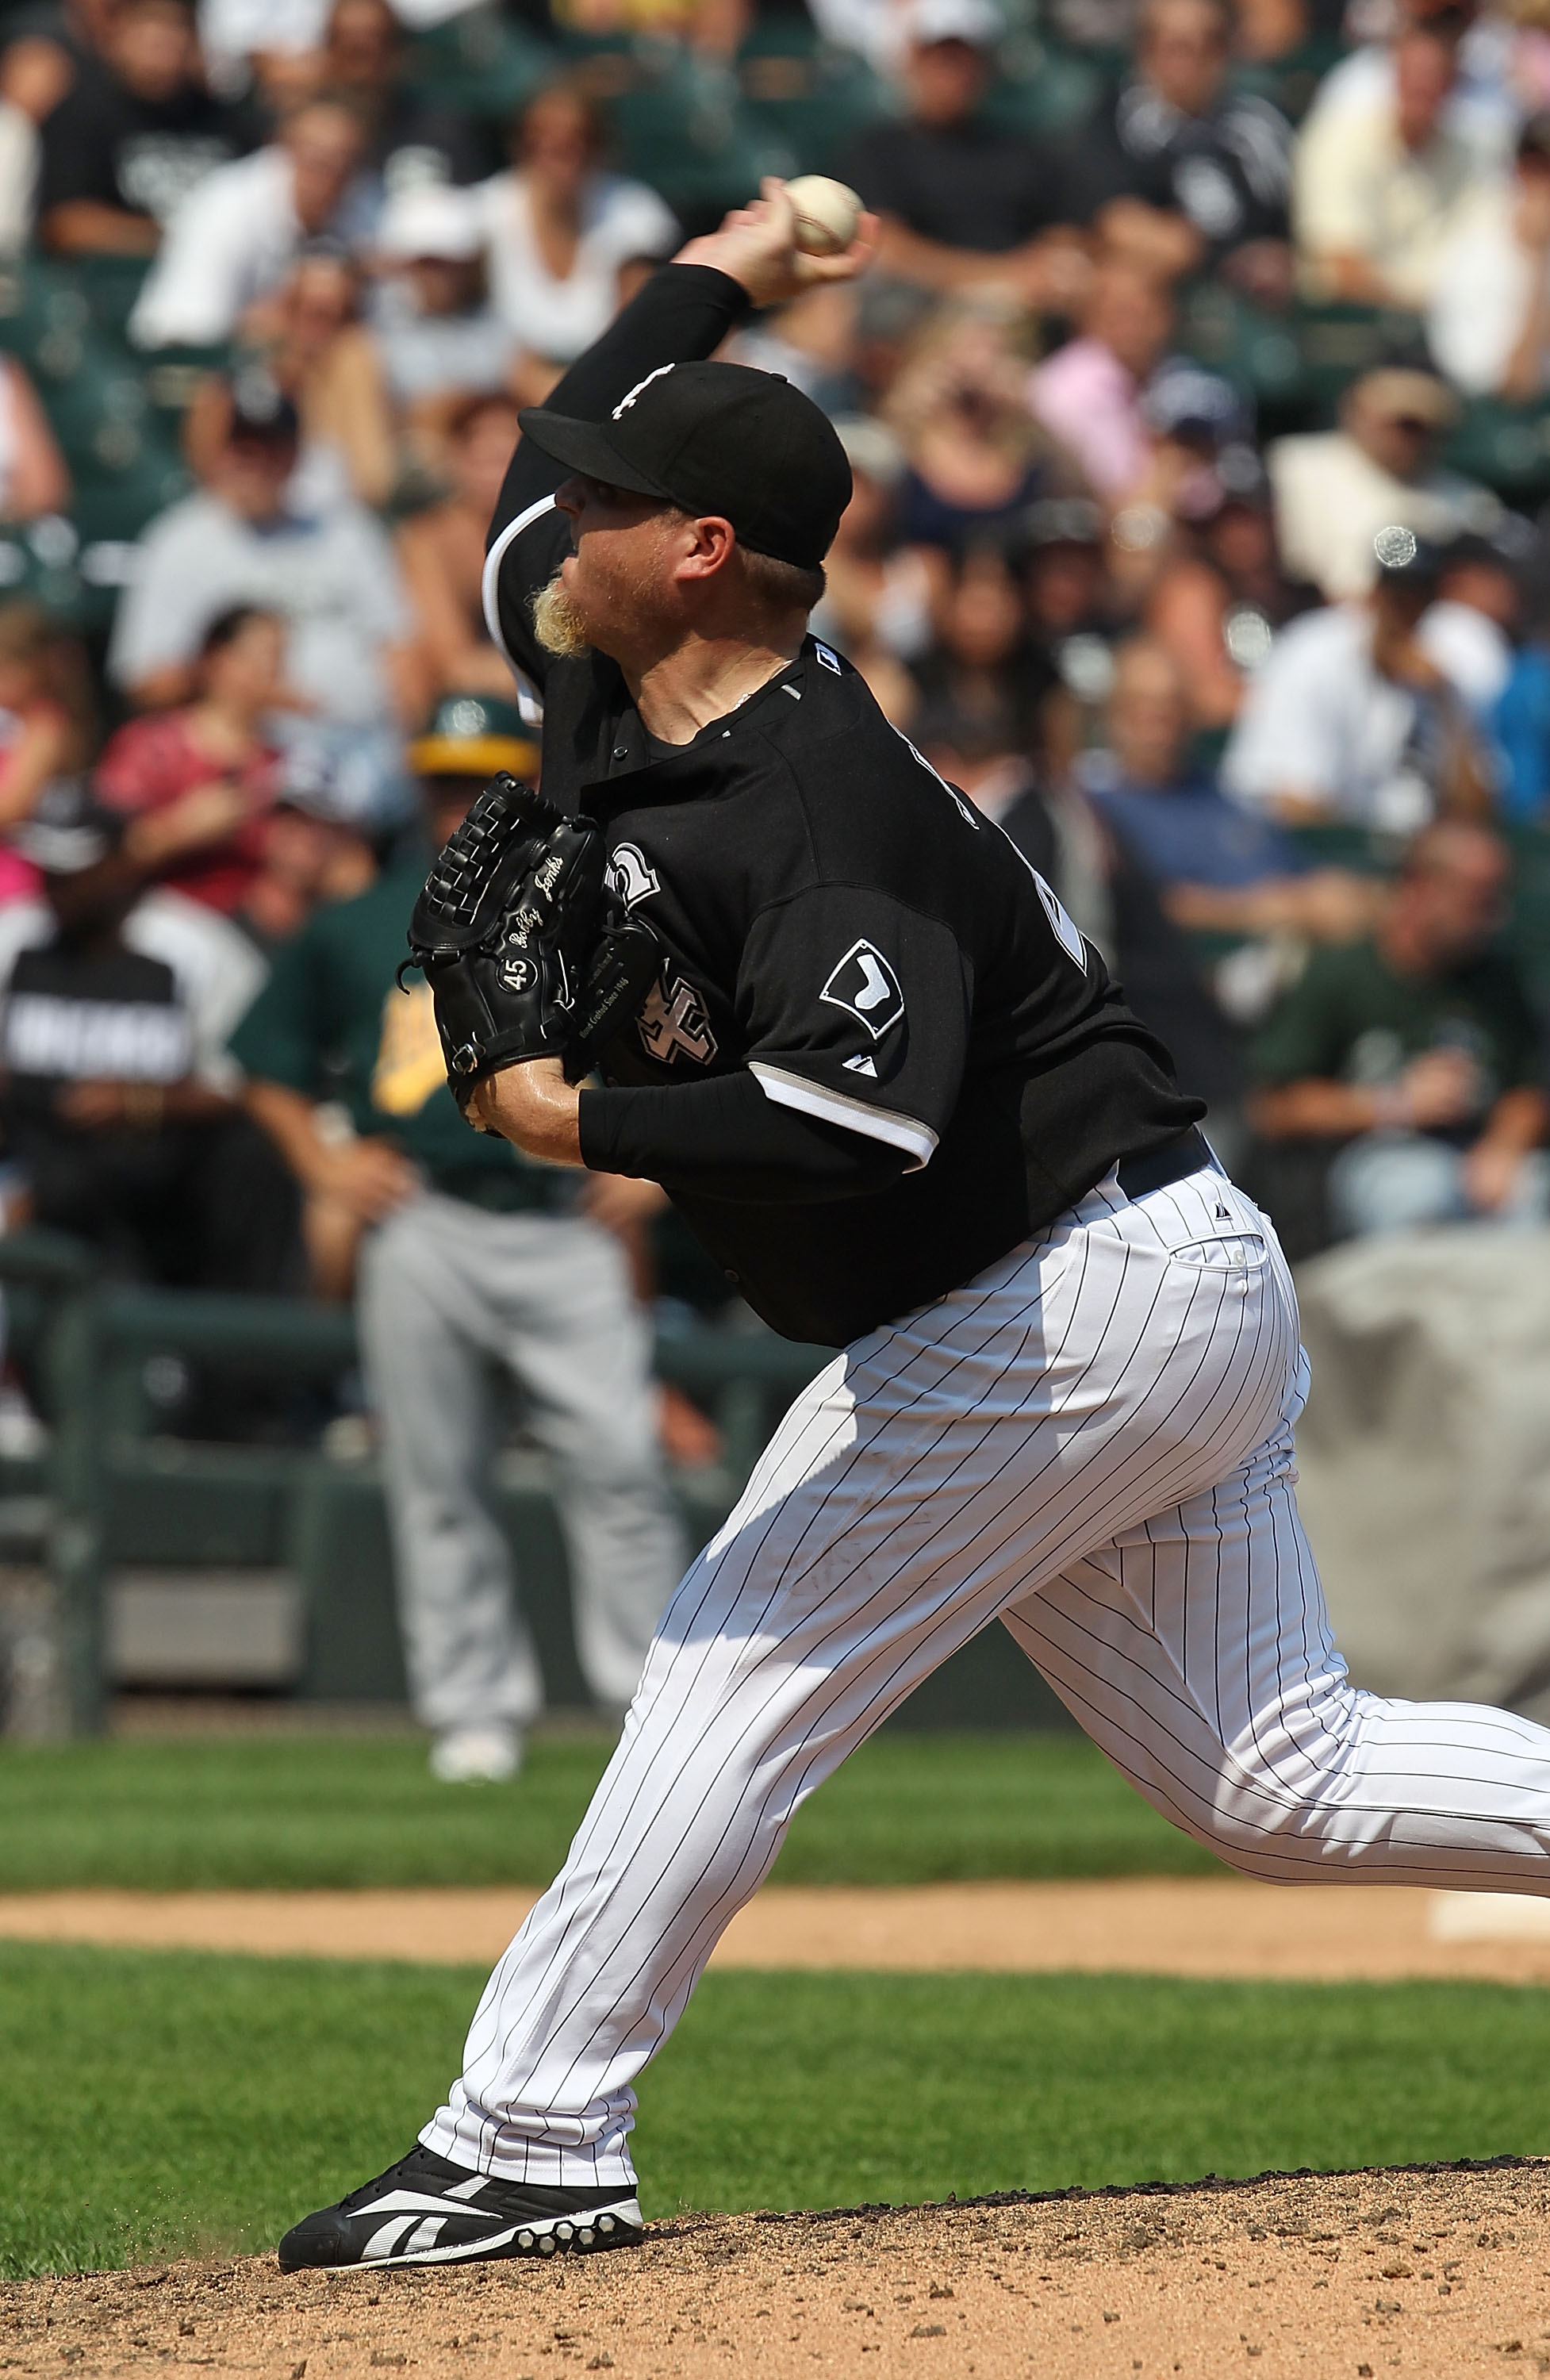 Chicago White Sox closer Bobby Jenks reacts after striking out